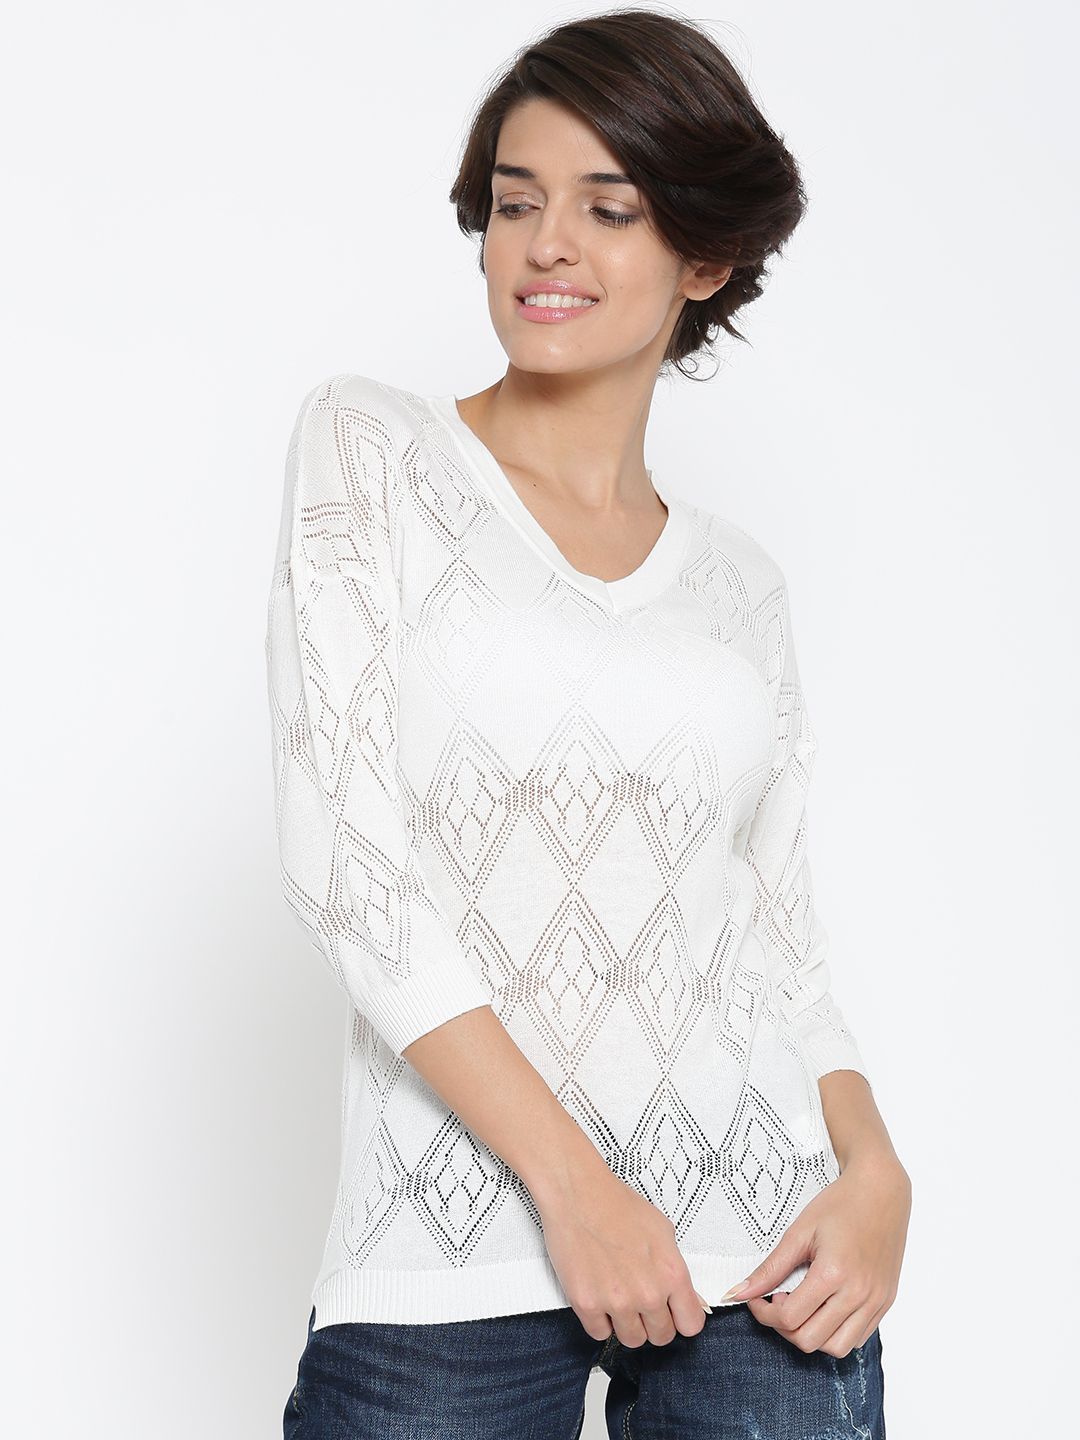 United Colors of Benetton Women White Patterned Pure Cotton Top Price in India